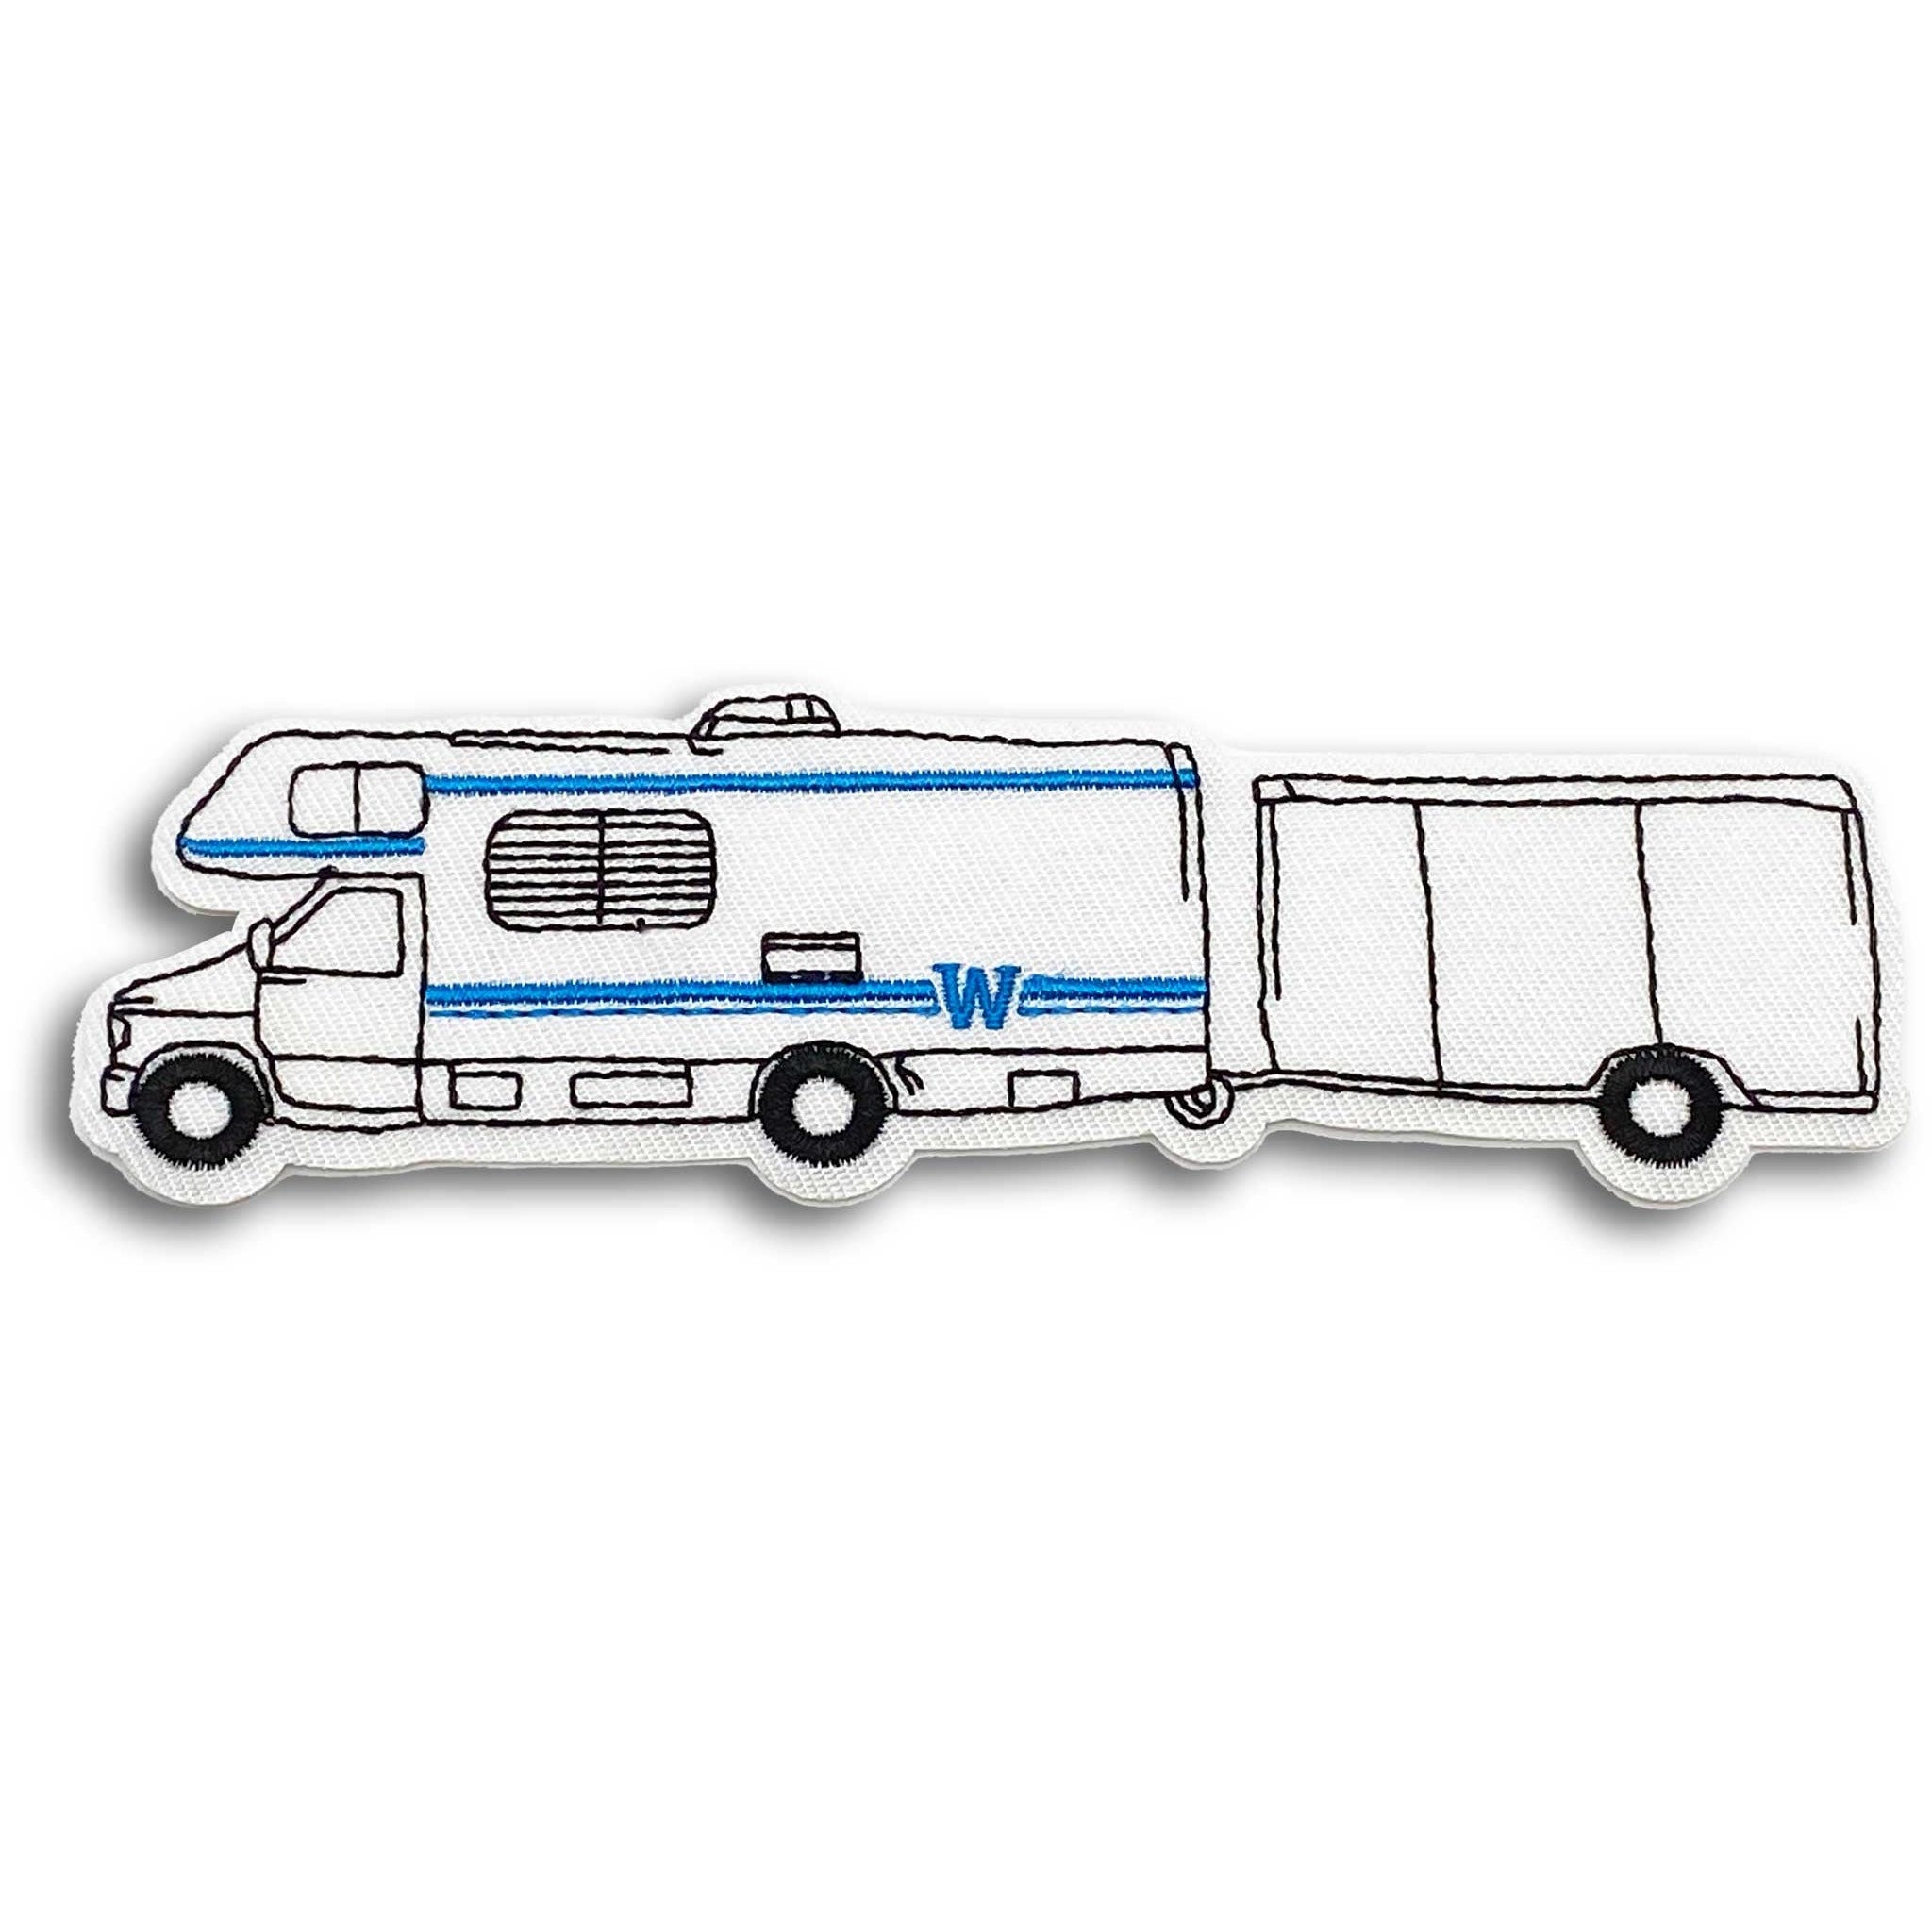 Iron-on Patch: AWP RV & GEAR TRAILER